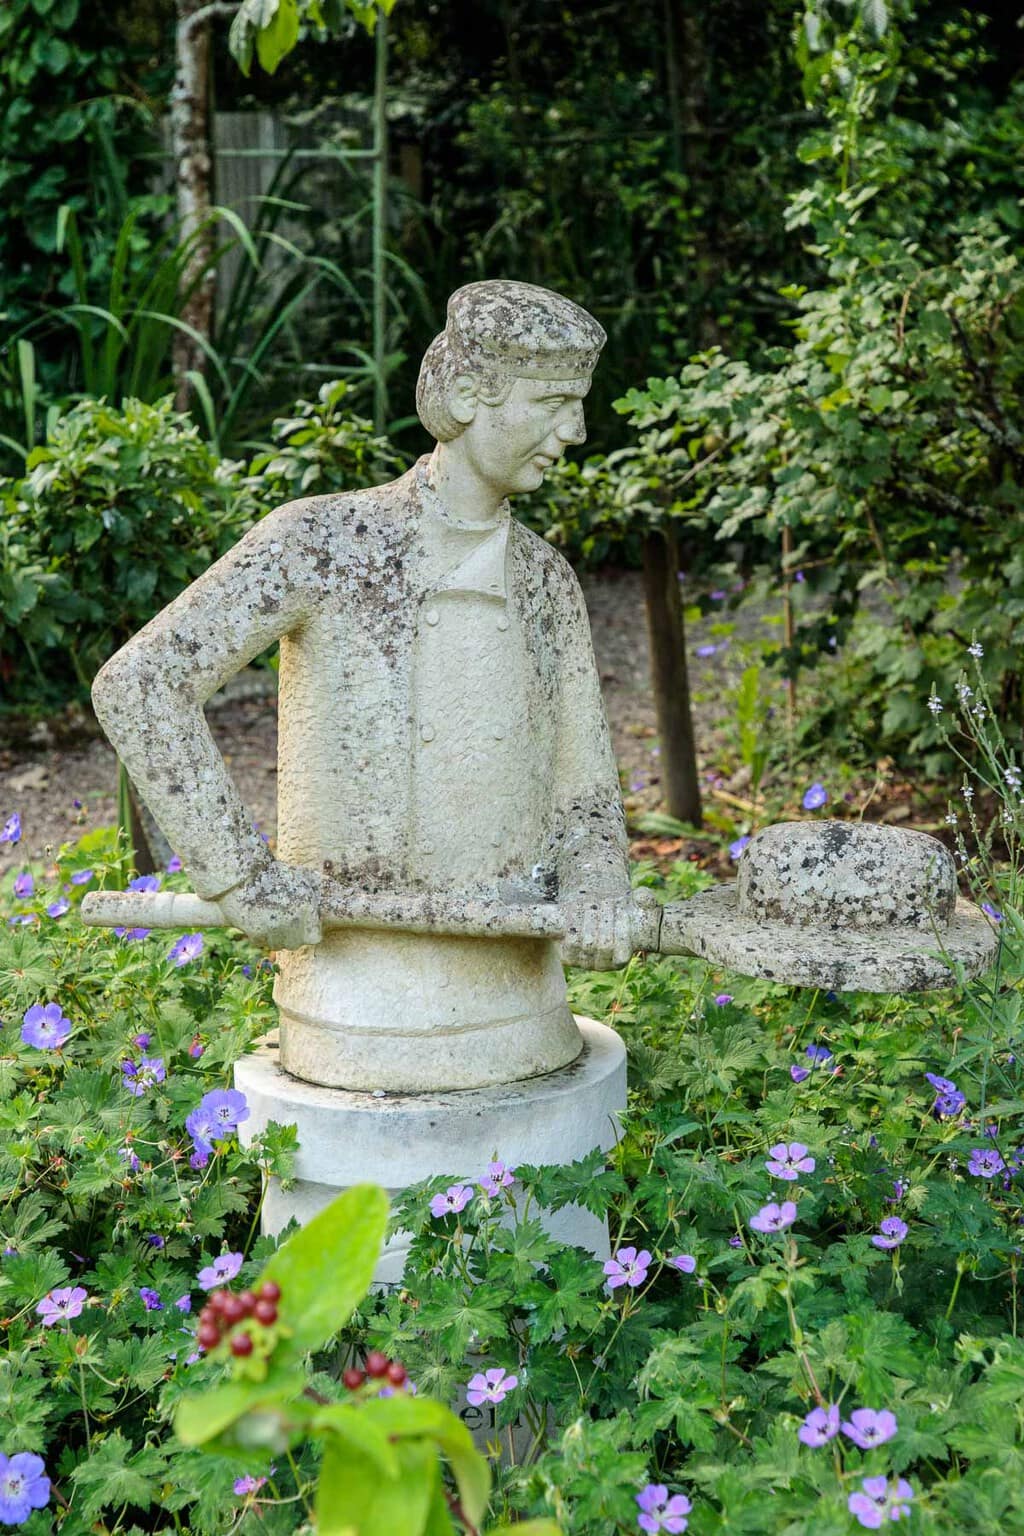 Photo of the baker sculpture in the gardens at Ballymaloe Cookery School.